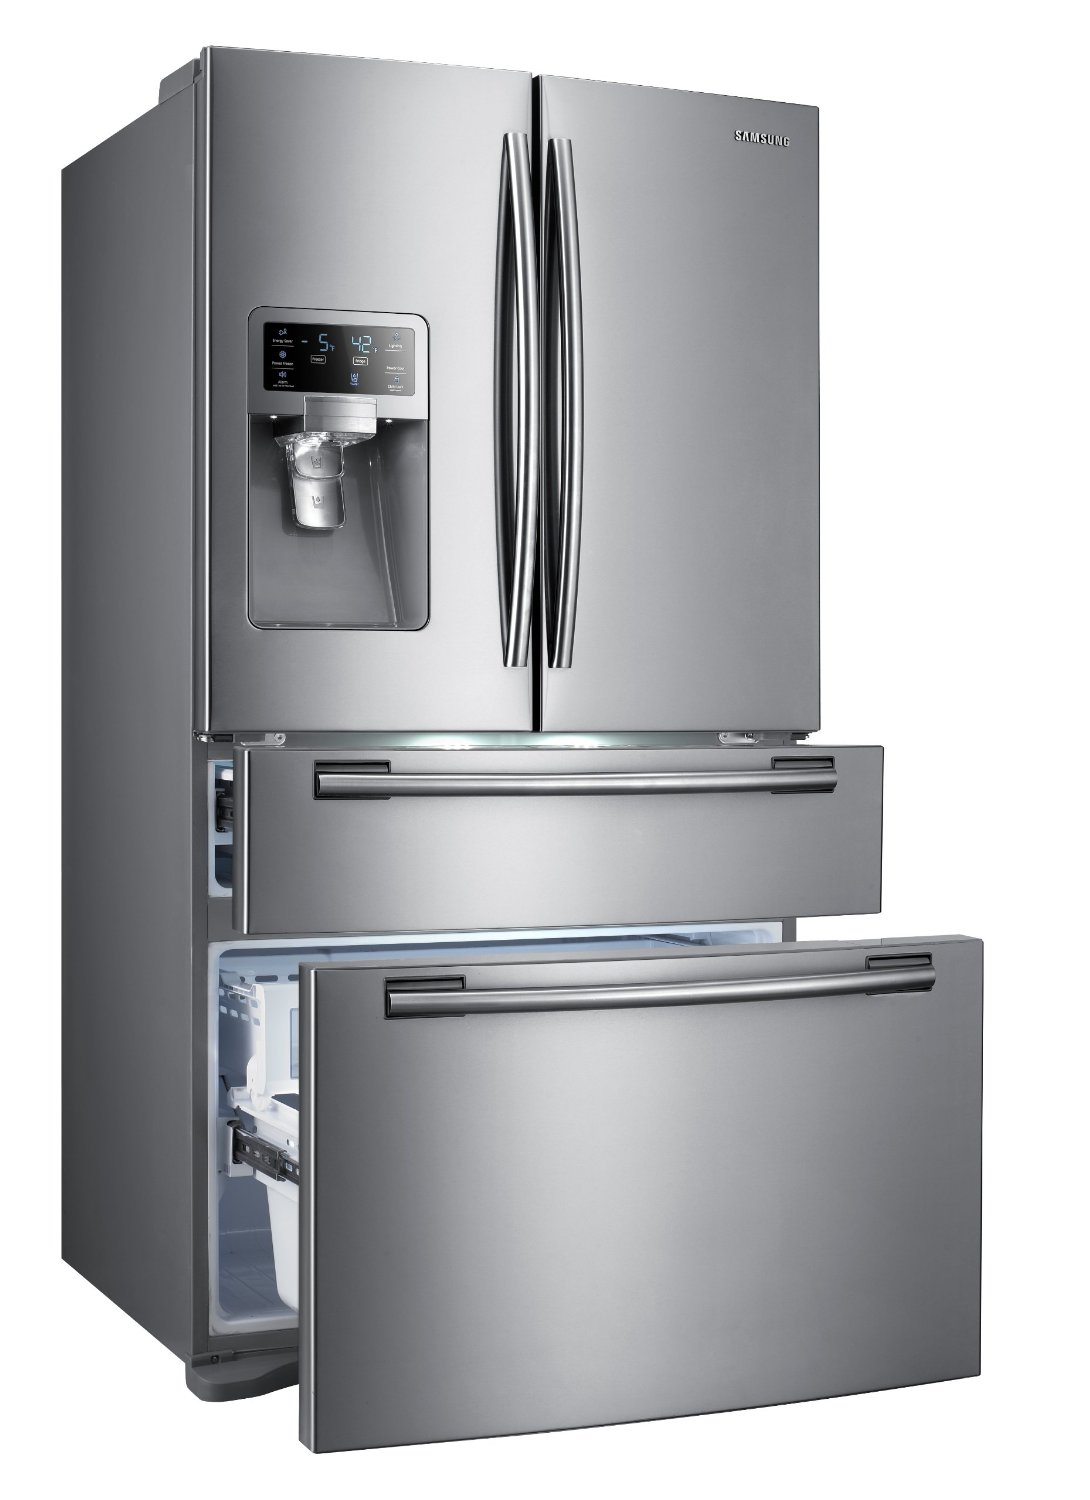 What are the ratings for Samsung refrigerators?